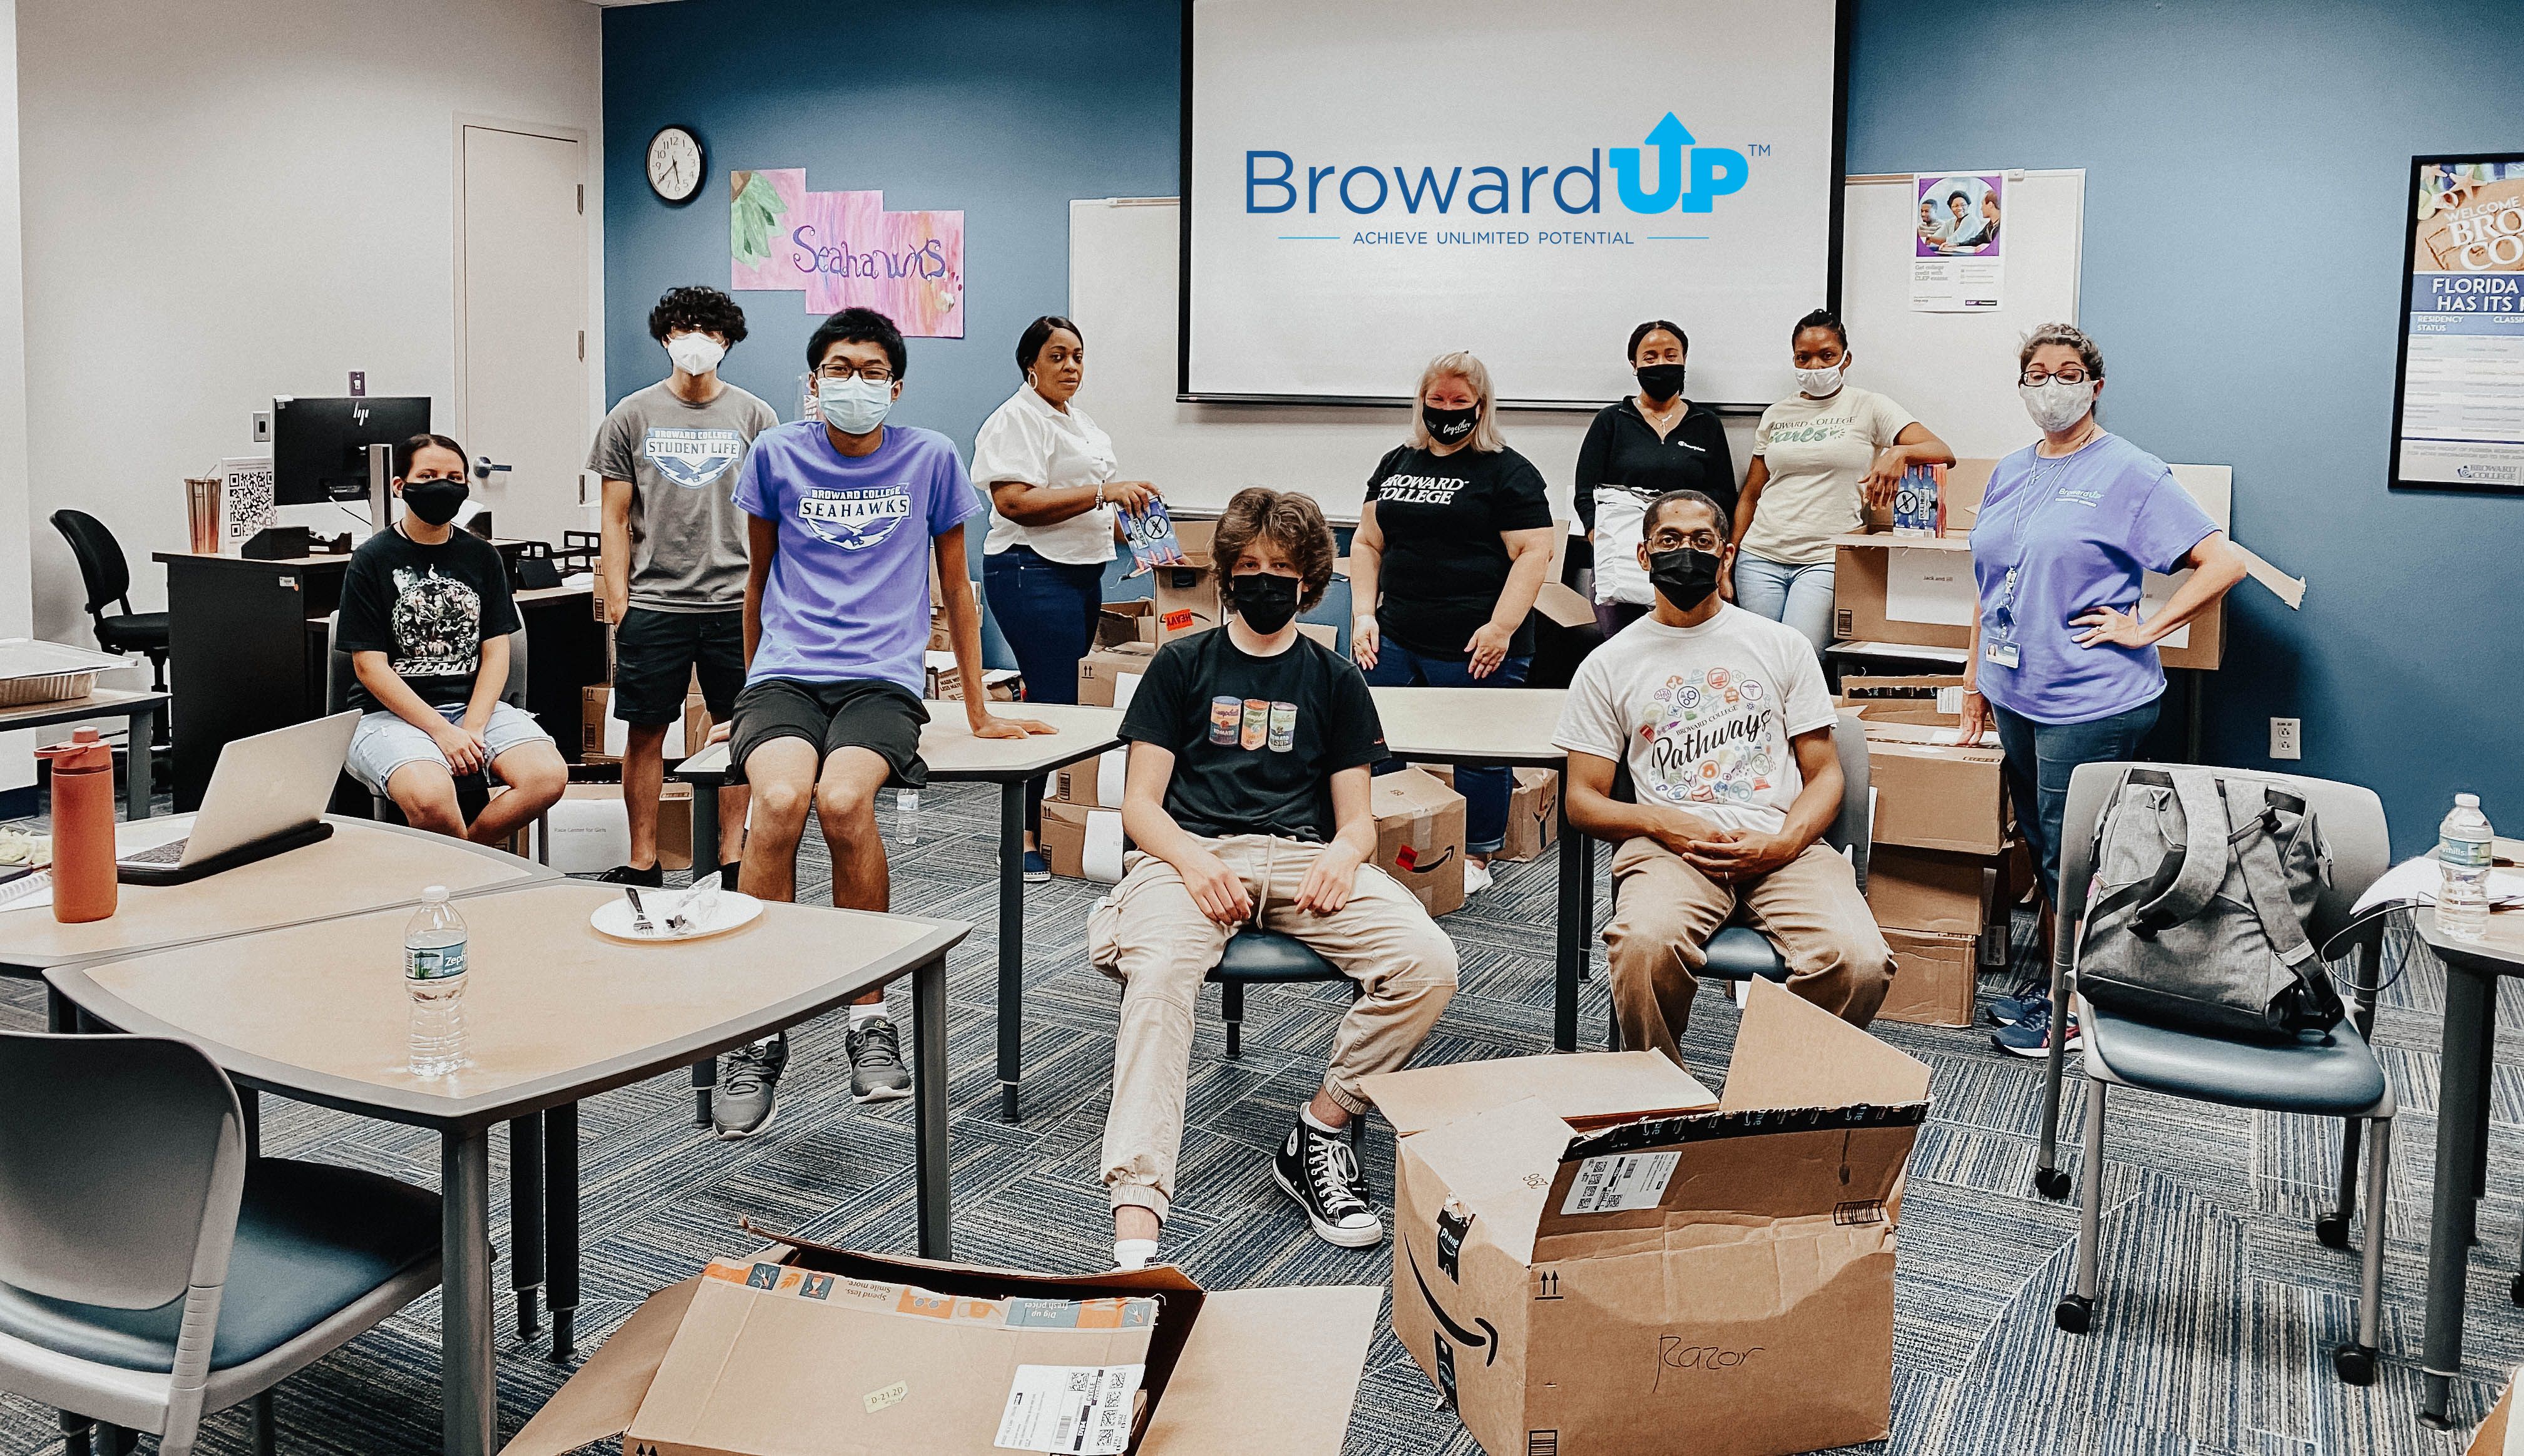 Broward UP Packing Party